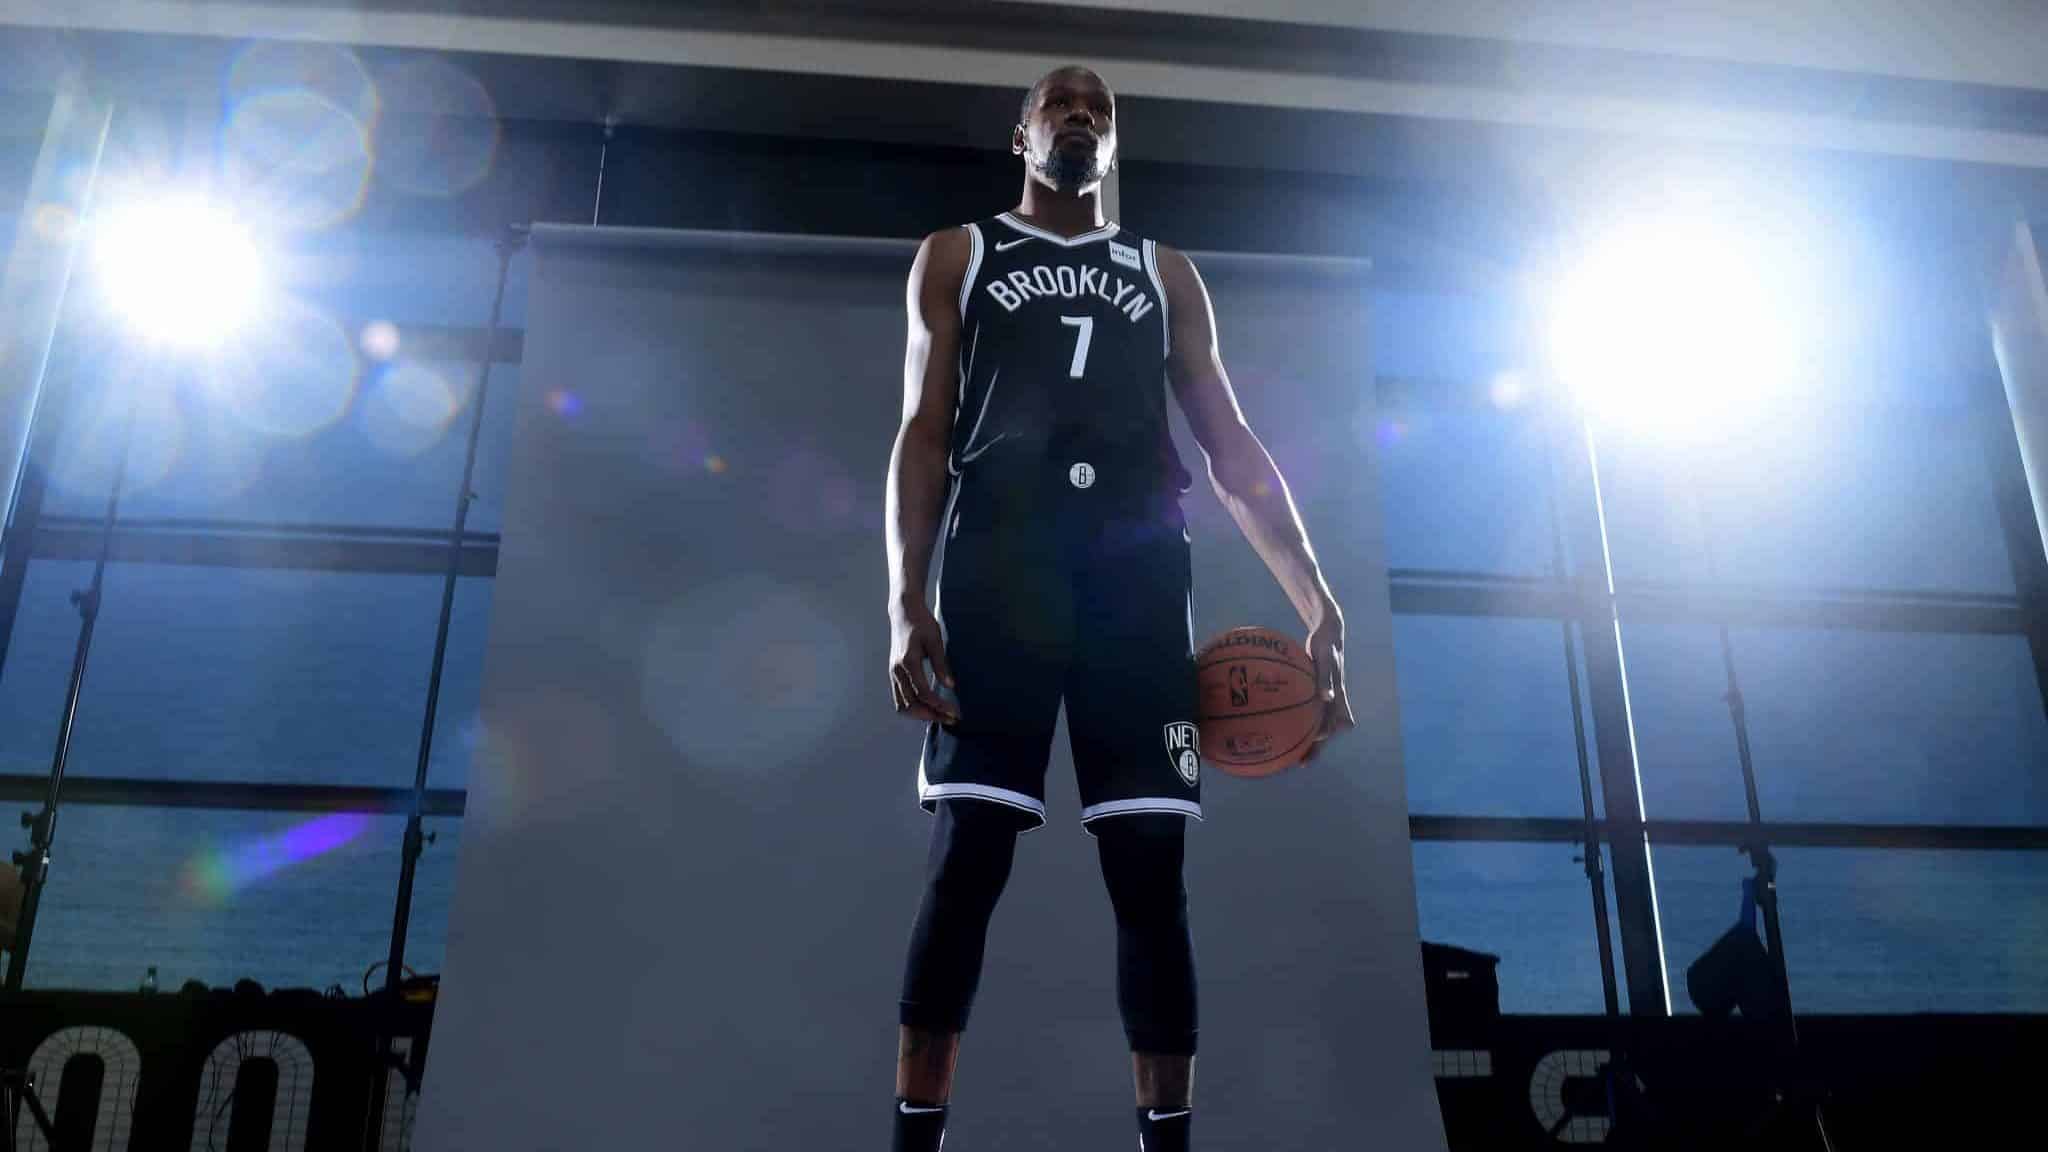 NEW YORK, NEW YORK - SEPTEMBER 27: Kevin Durant #7 of the Brooklyn Nets poses for a photograph during Media Day at HSS Training Center on September 27, 2019 in the Brooklyn borough of New York City. NOTE TO USER: User expressly acknowledges and agrees that, by downloading and or using this photograph, User is consenting to the terms and conditions of the Getty Images License Agreement.